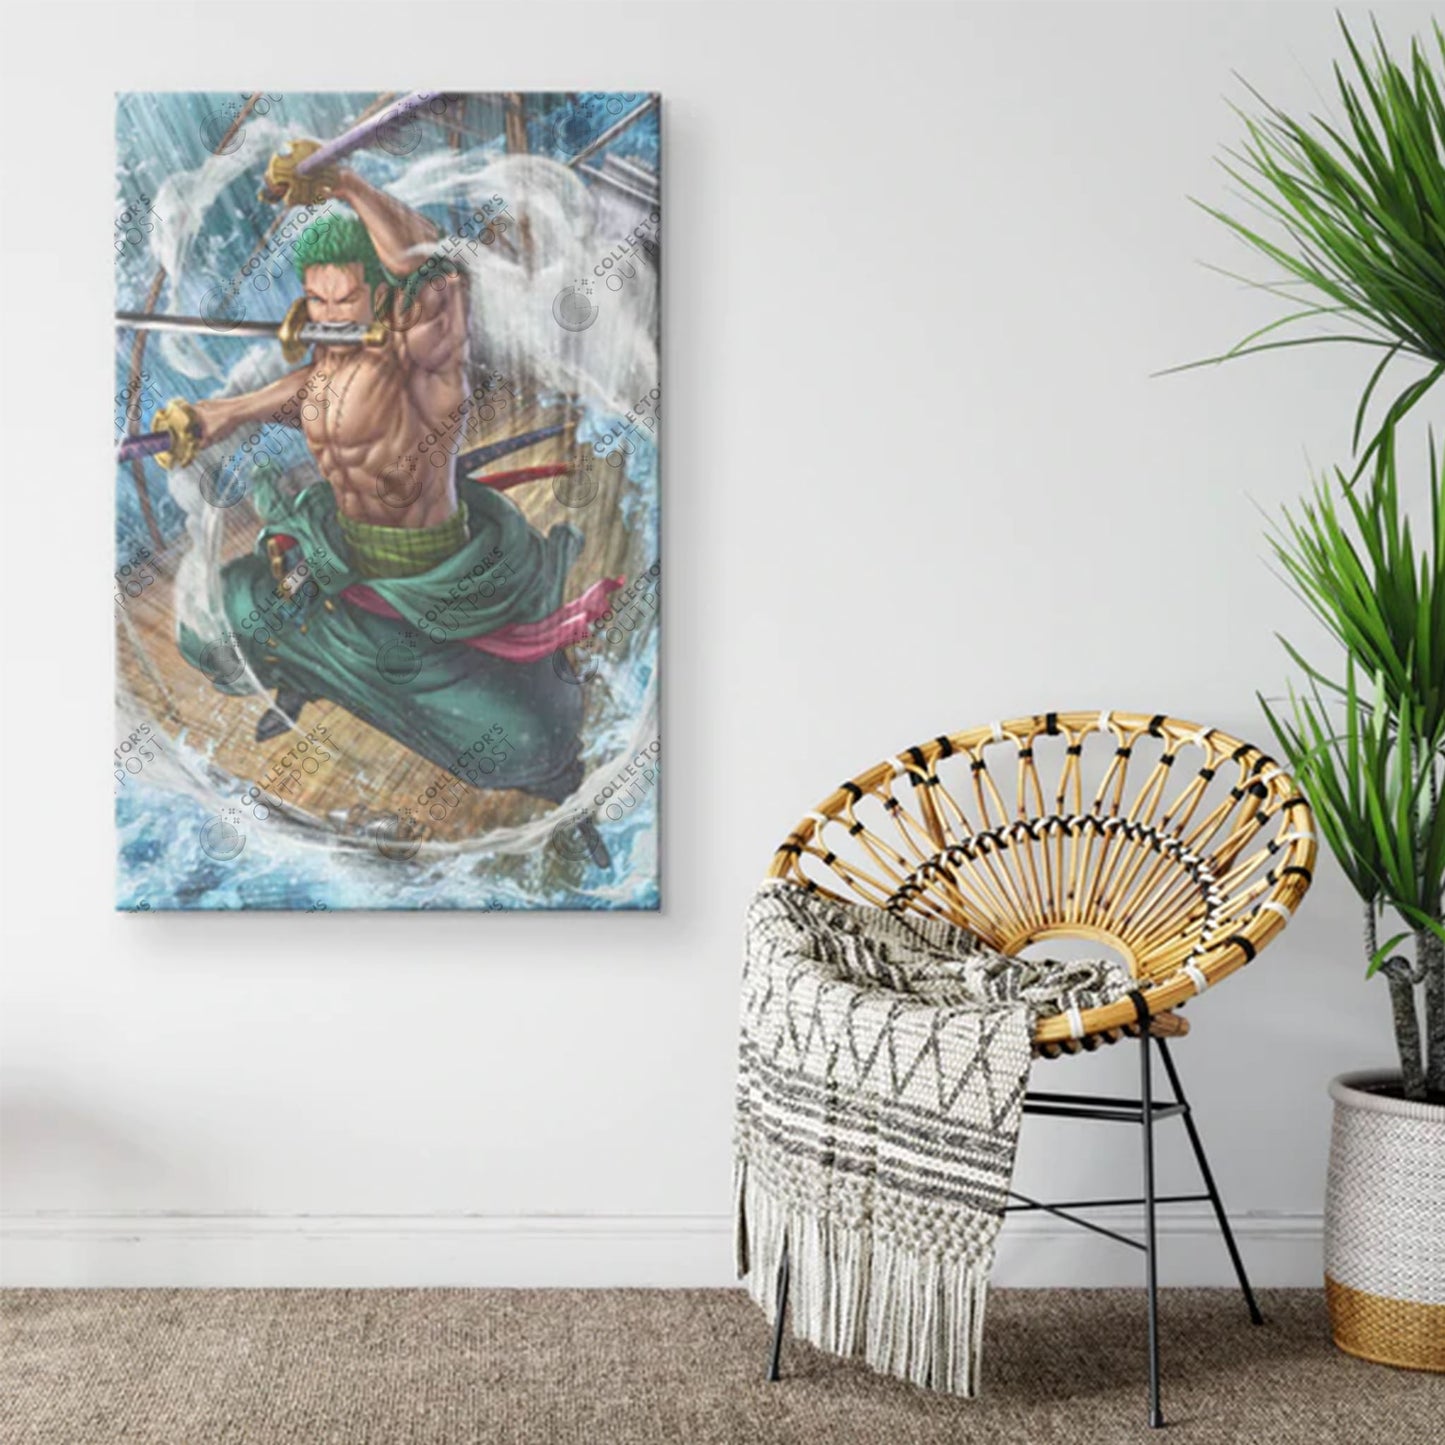 Zoro One Piece Nine Sword Style Art Print – Collector's Outpost